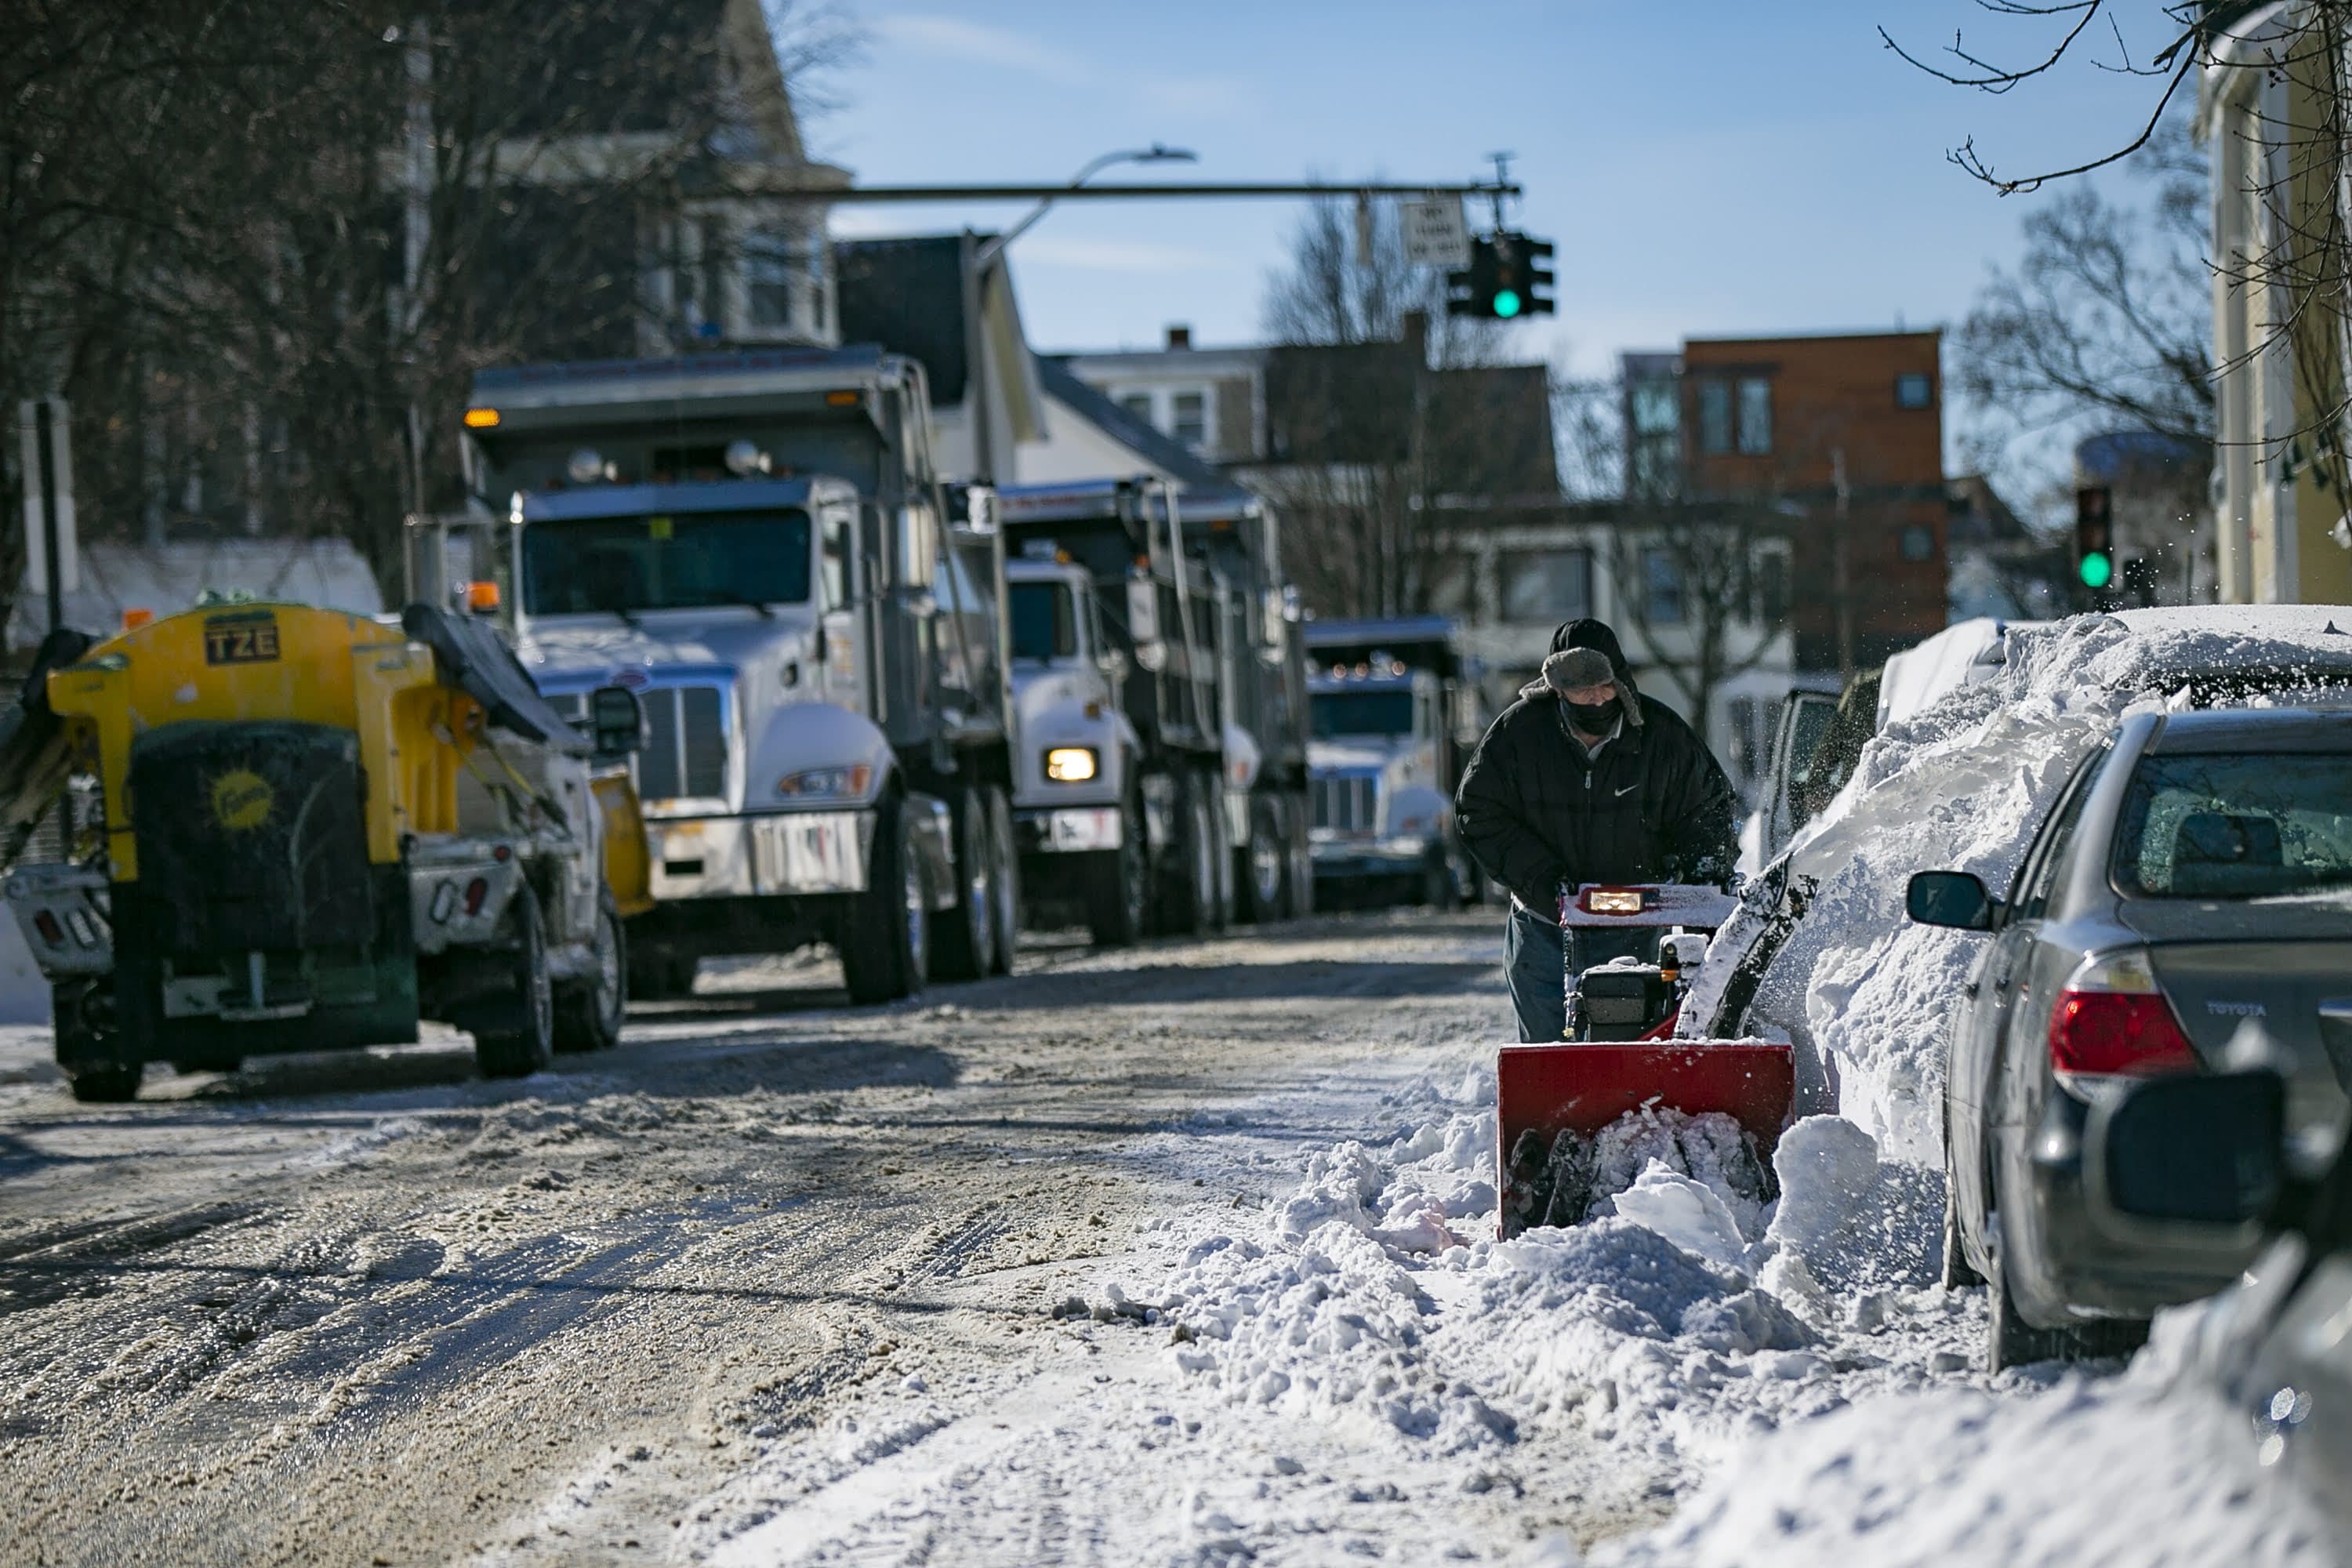 A man uses a snowblower to clear snow from in front of his car on Cross Street in Somerville. (Jesse Costa/WBUR)